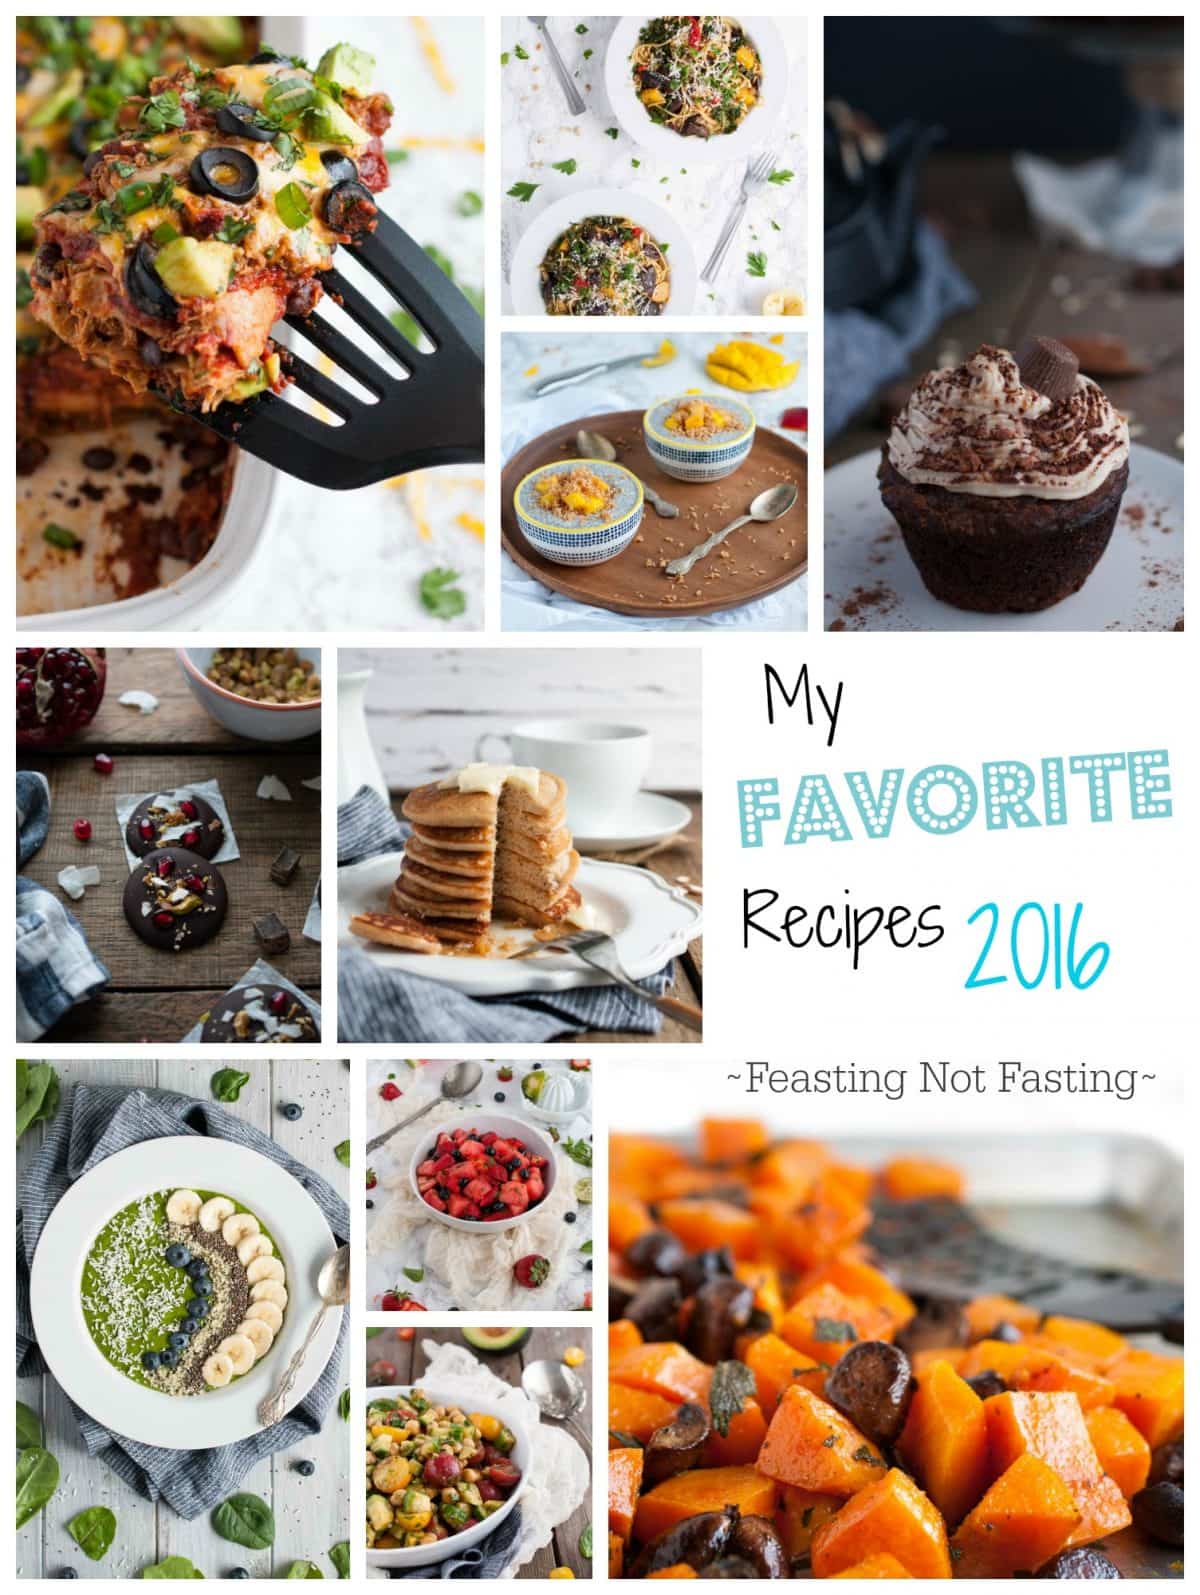 The best recipes of 2016 on Feasting Not Fasting - recipes that are healthy and good for you, but always delicious and fulfilling. 